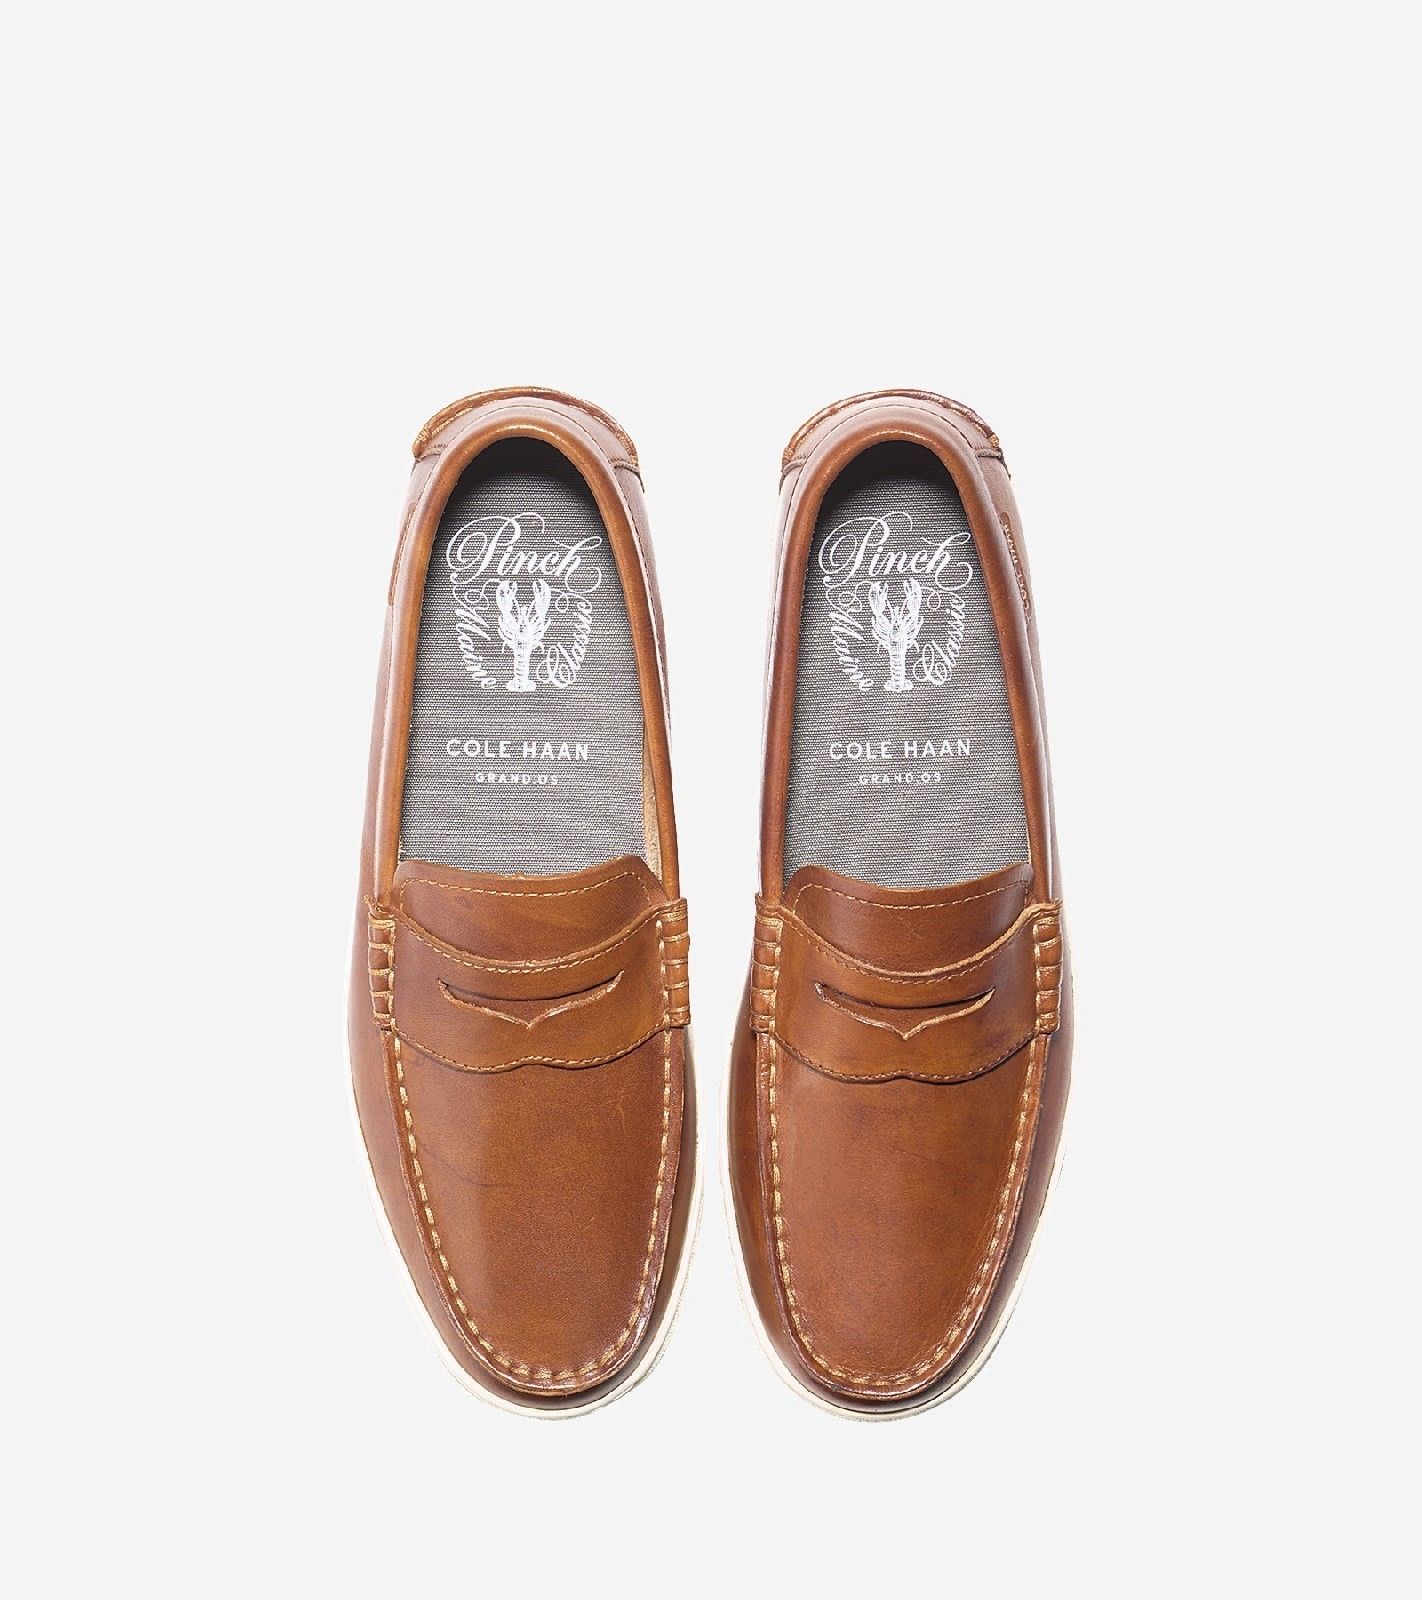 The Pinch Weekender Loafer is a modern take on the iconic penny loafer silhouette,a staple of ours for decades.Refering to the manner in which a cobbler 'pinches' the leather as it's sewn together. Our Grand.OS innovation delivers superior cushioning Grand.OS innovation. 
Pinched Sewn Leather. 
Superior Cushoning.